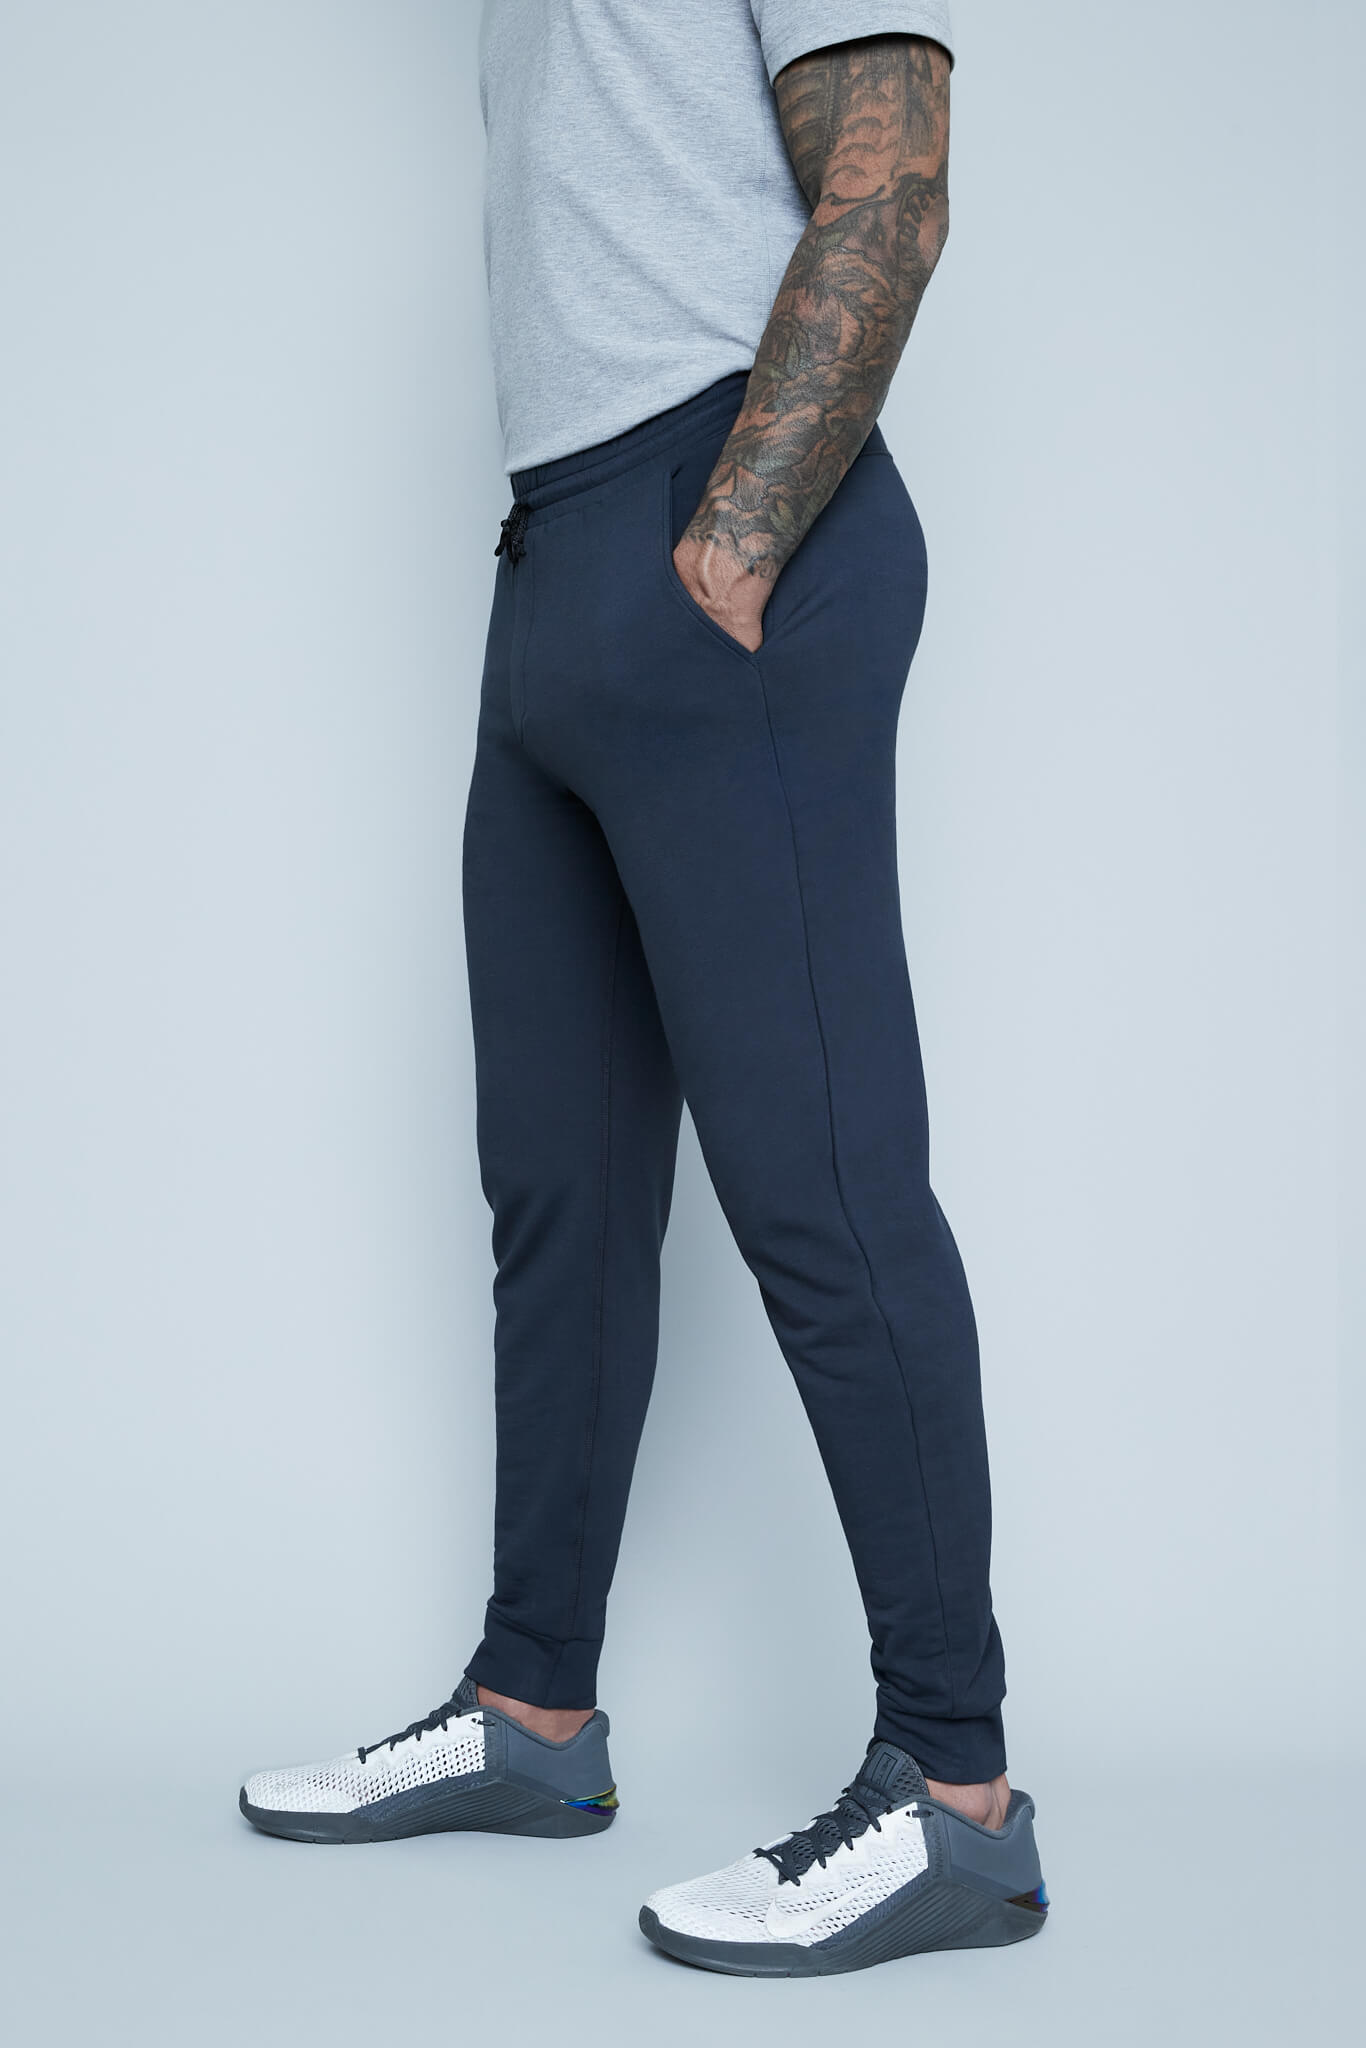 Tall sweatpants for tall guys in grey by Navas Lab. The perfect mens tall joggers for tall mens looking for style and comfort.